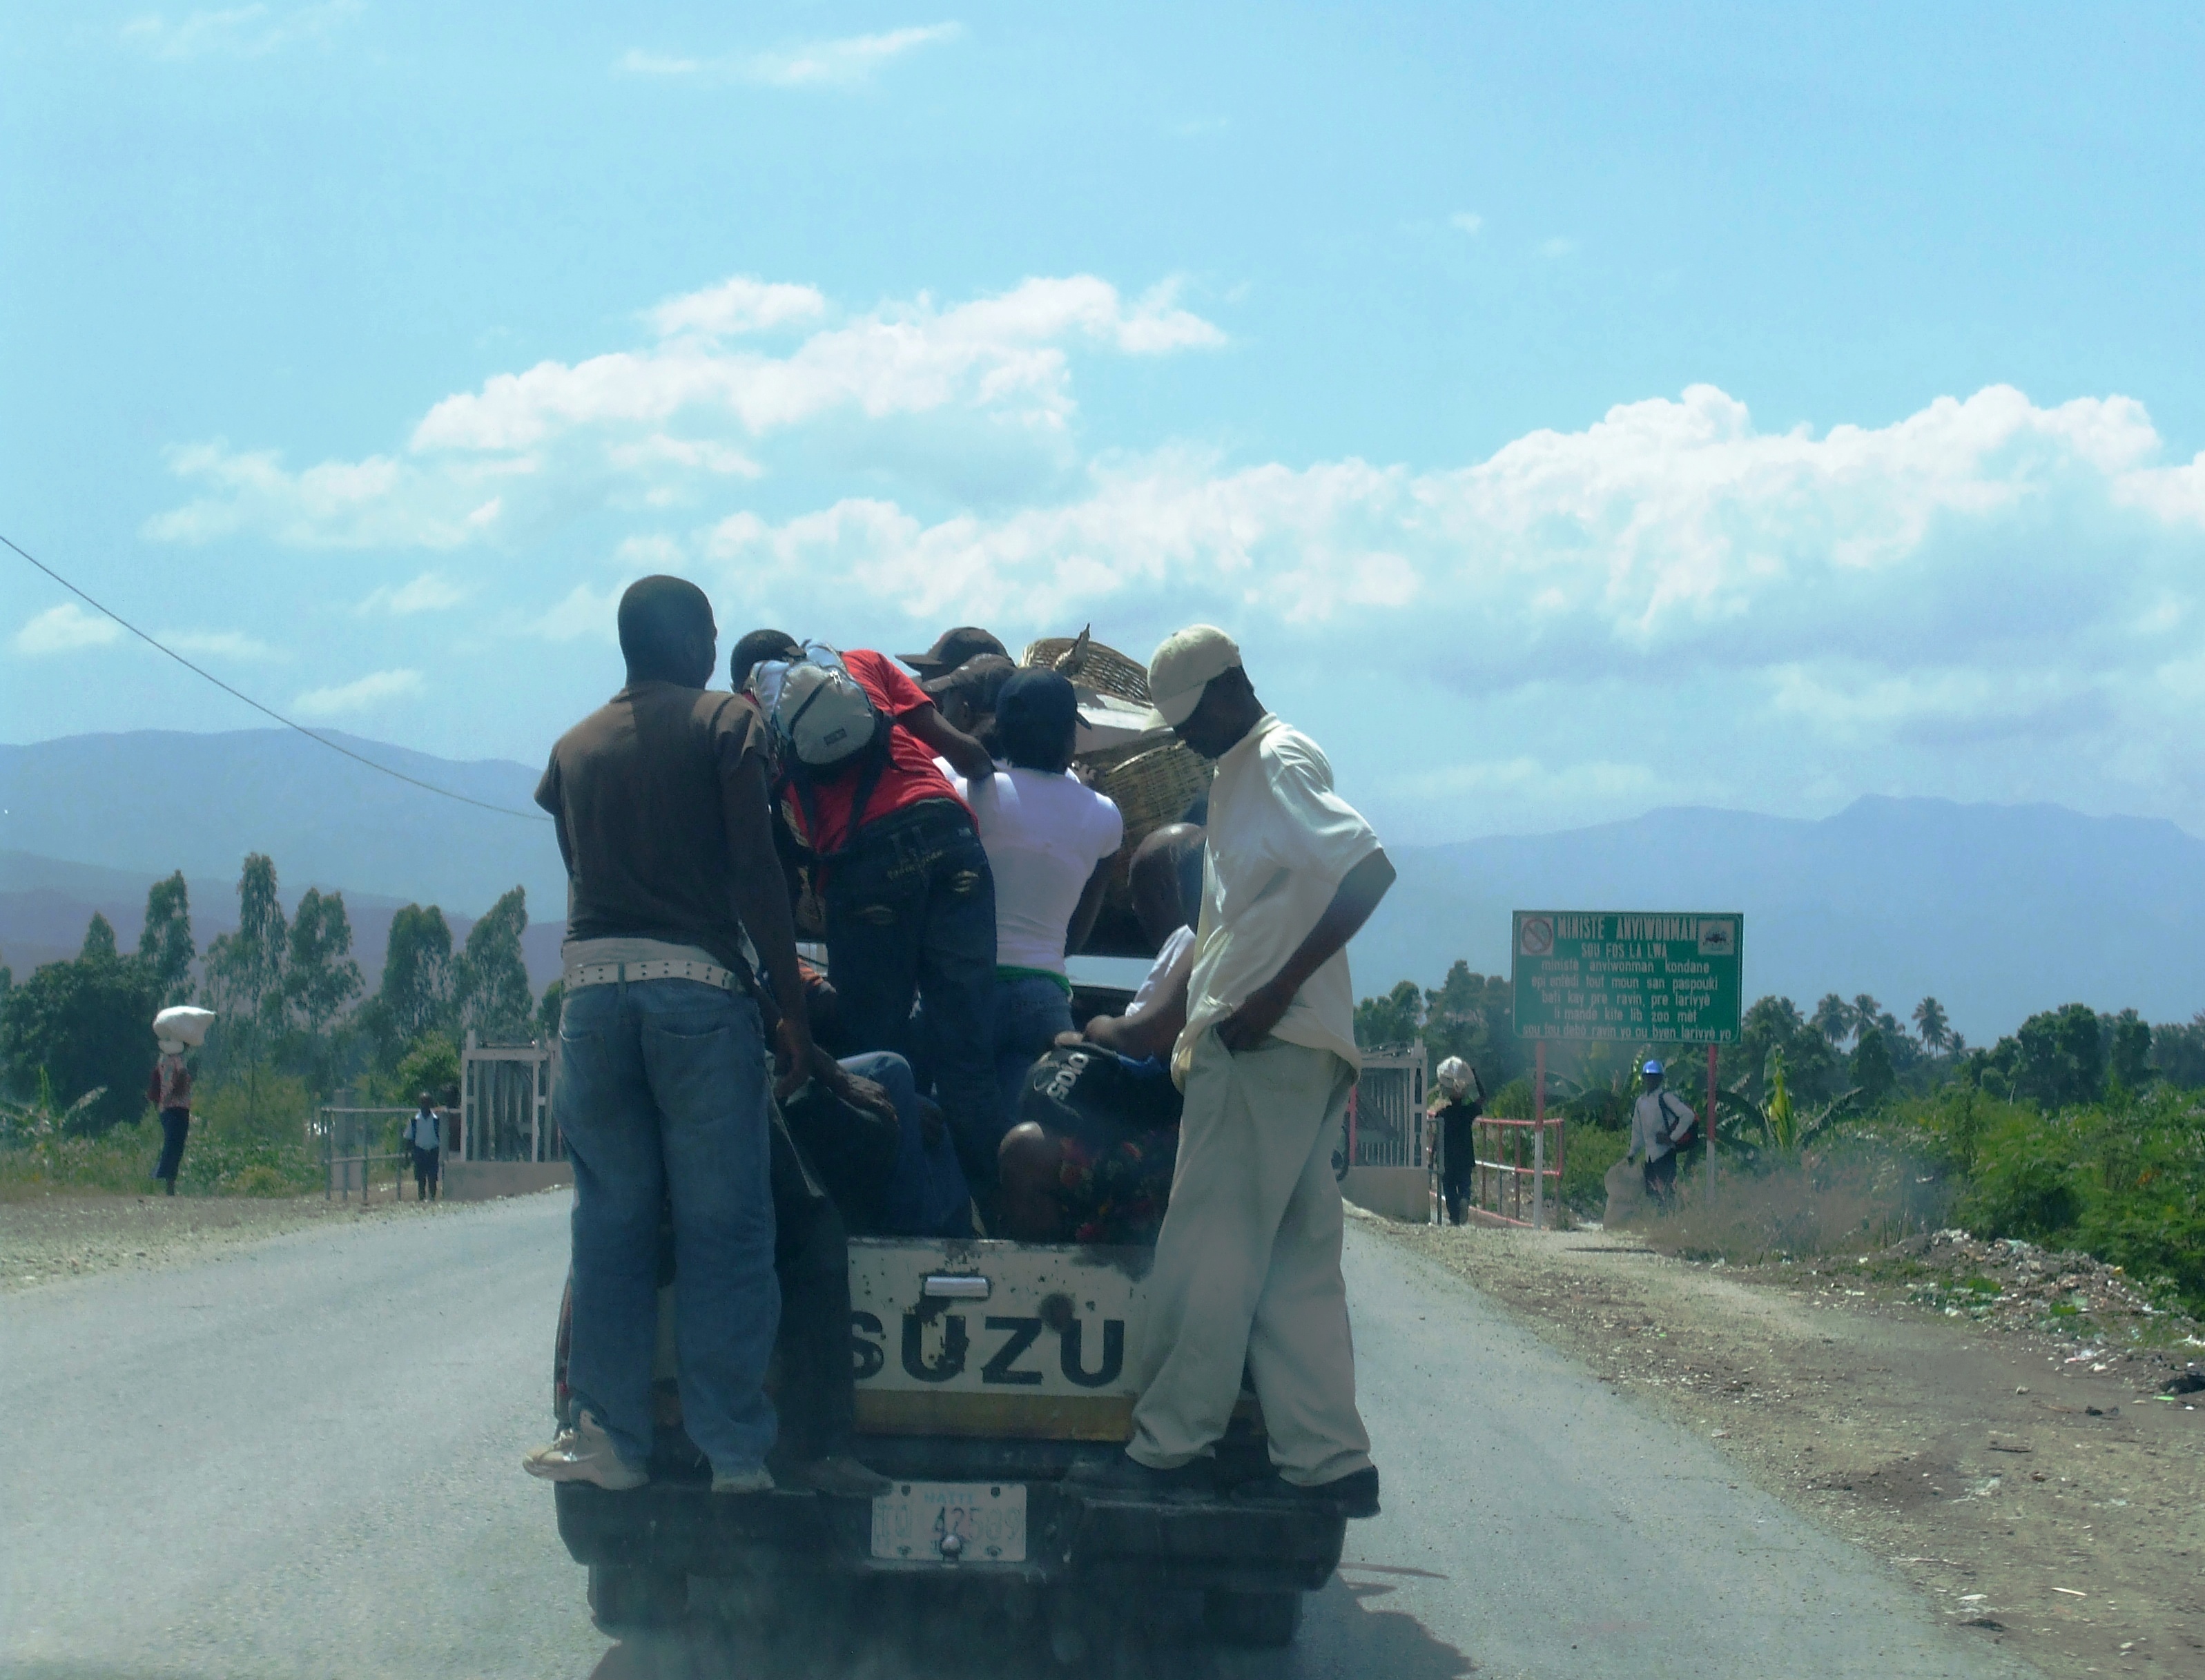 The most common form of public transportation in Haiti, the “taptap,” is named for what you do on the vehicle when you want to get off.